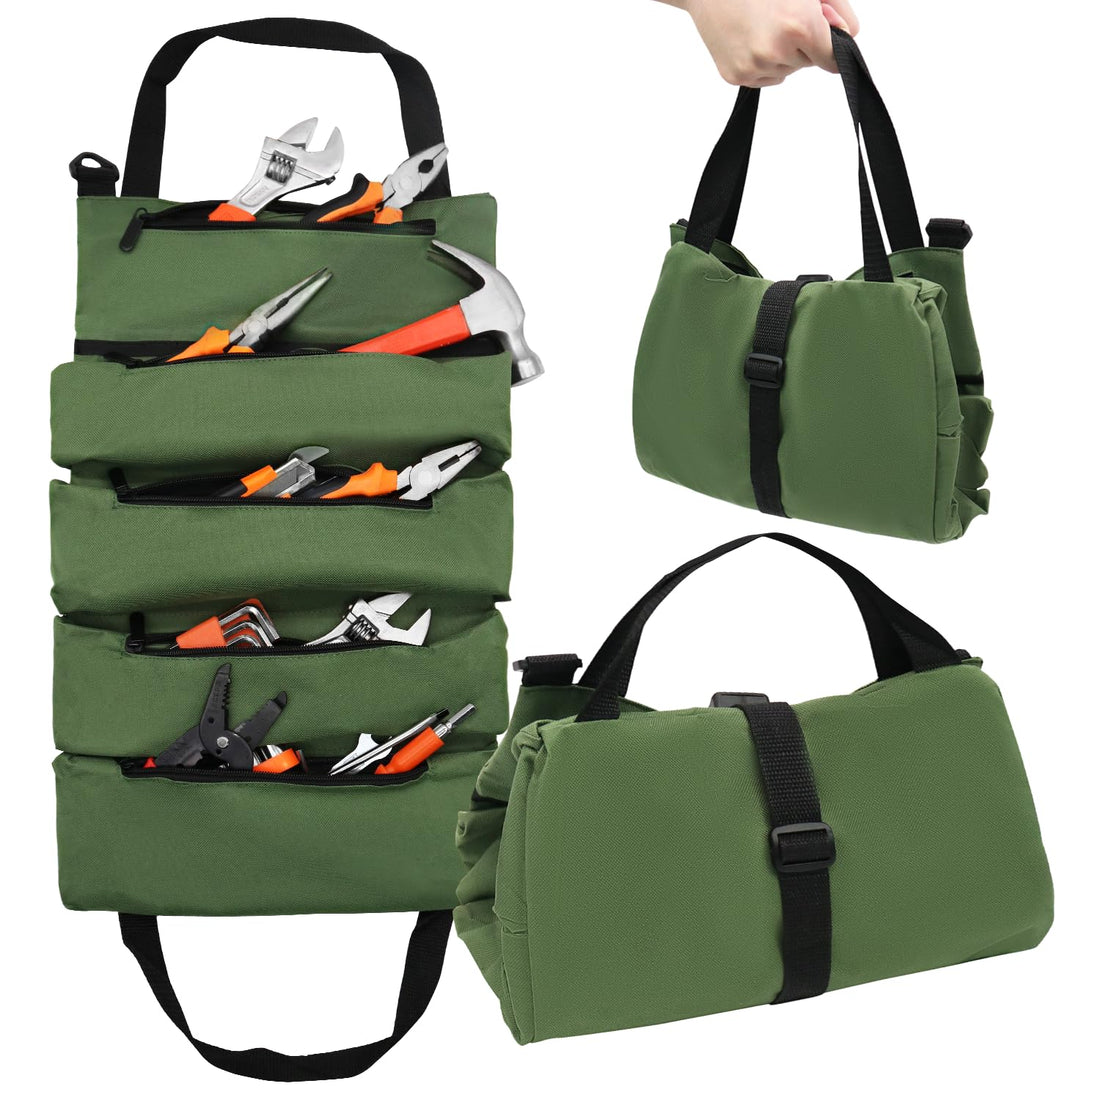 GardenJoy Tool Roll Up Bag, Small Duty Tool Bag Organizer with 5 Tool Pouches, Compact & Lightweight Tool Roll Bag For Mechanic, Electrician, DIY Projrct, Carpenter & Hobbyist